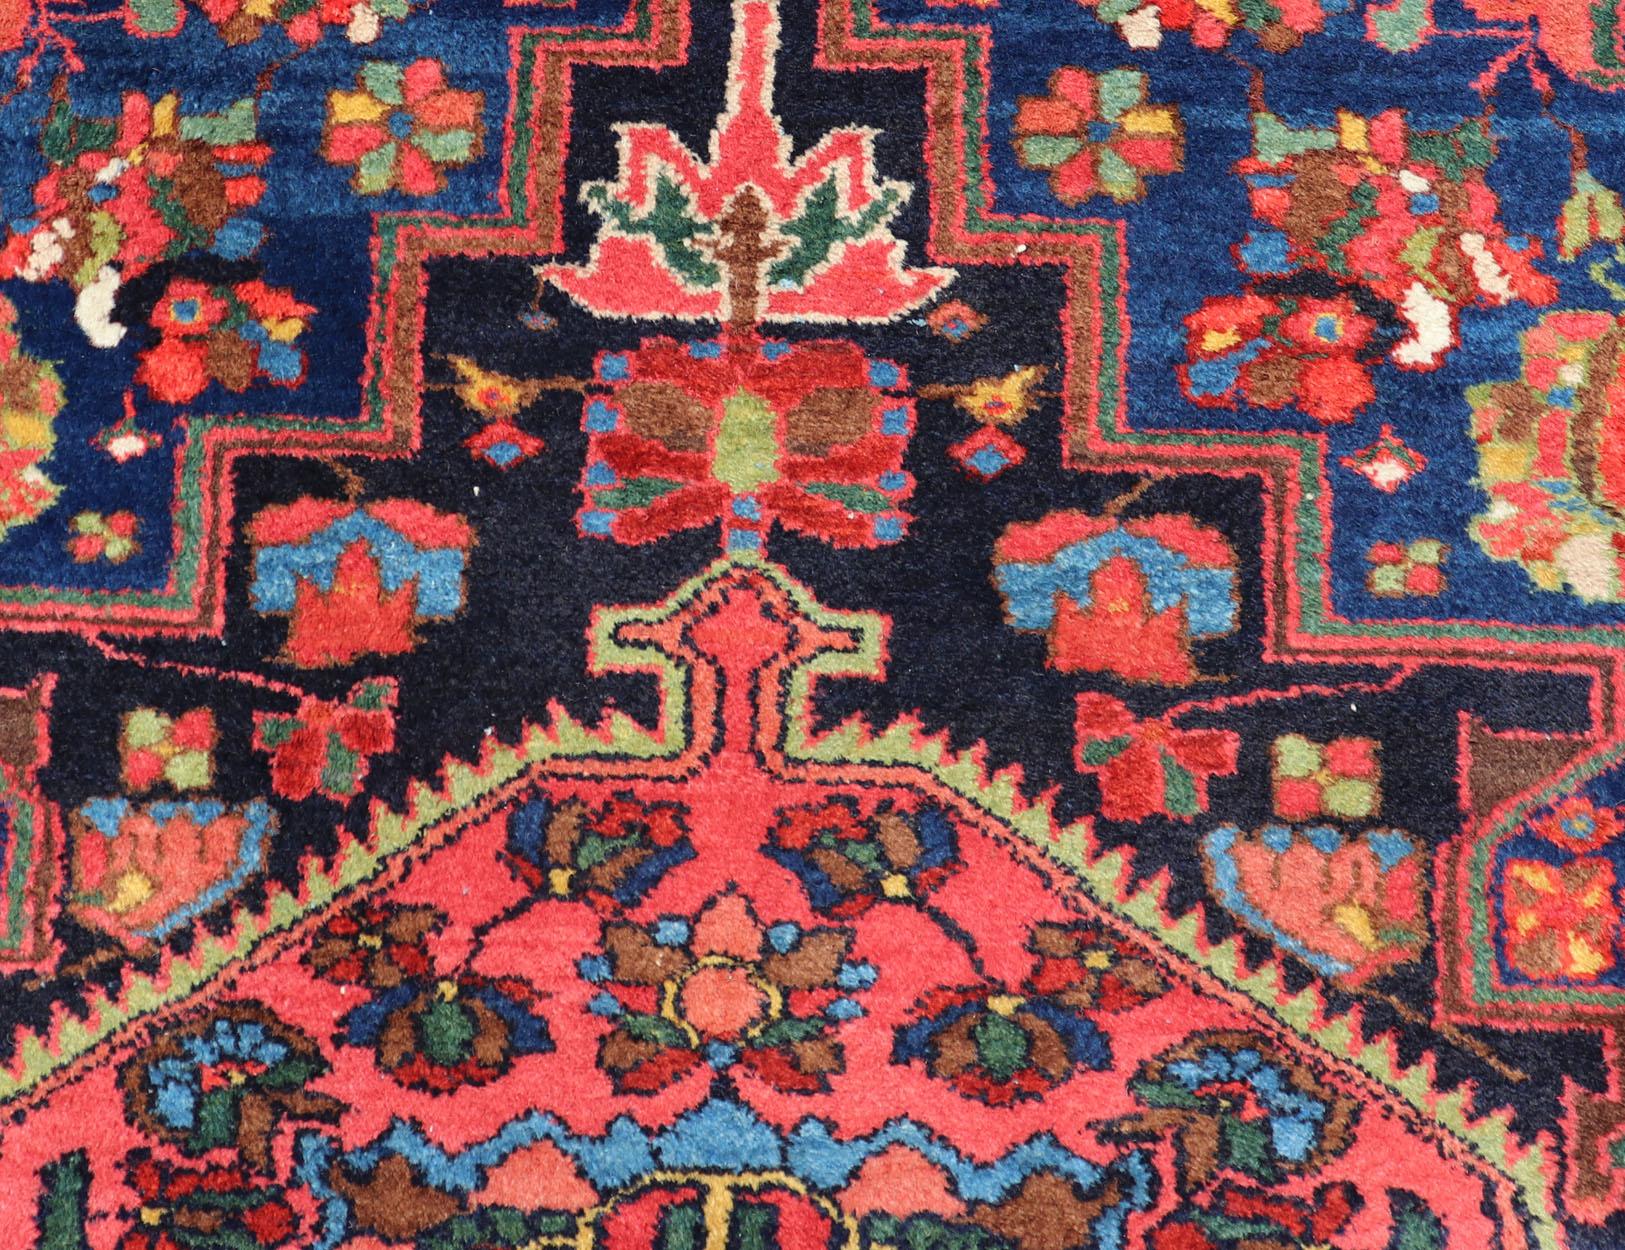 This Antique Hamadan rug hailing from Persia features a large central medallion, surrounded by sub-geometric motifs and enclosed within a complementary multi-tiered border. Keivan Woven Arts Rugs

Antique Persian Hamadan rug in rich colors with